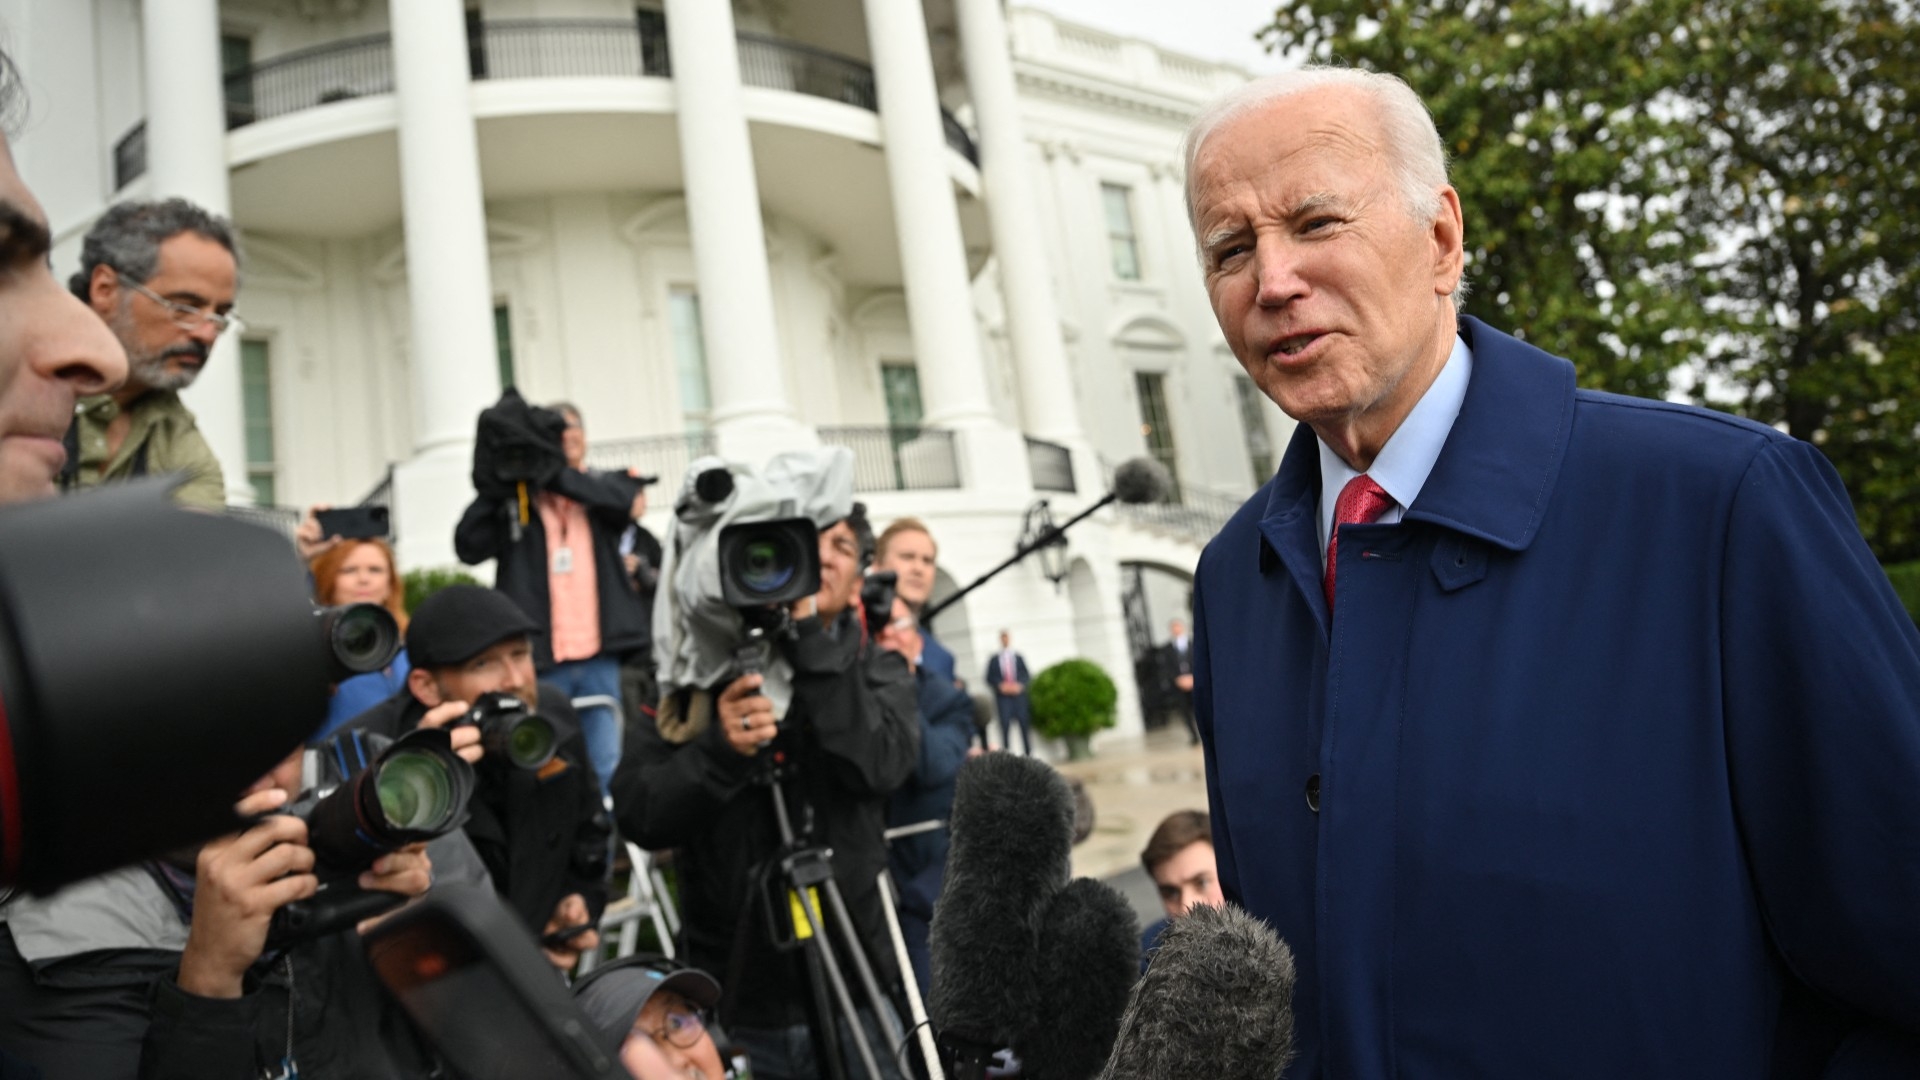 US President Joe Biden speaks to members of the media on the South Lawn of the White House in Washington on 29 May 2023 (AFP)